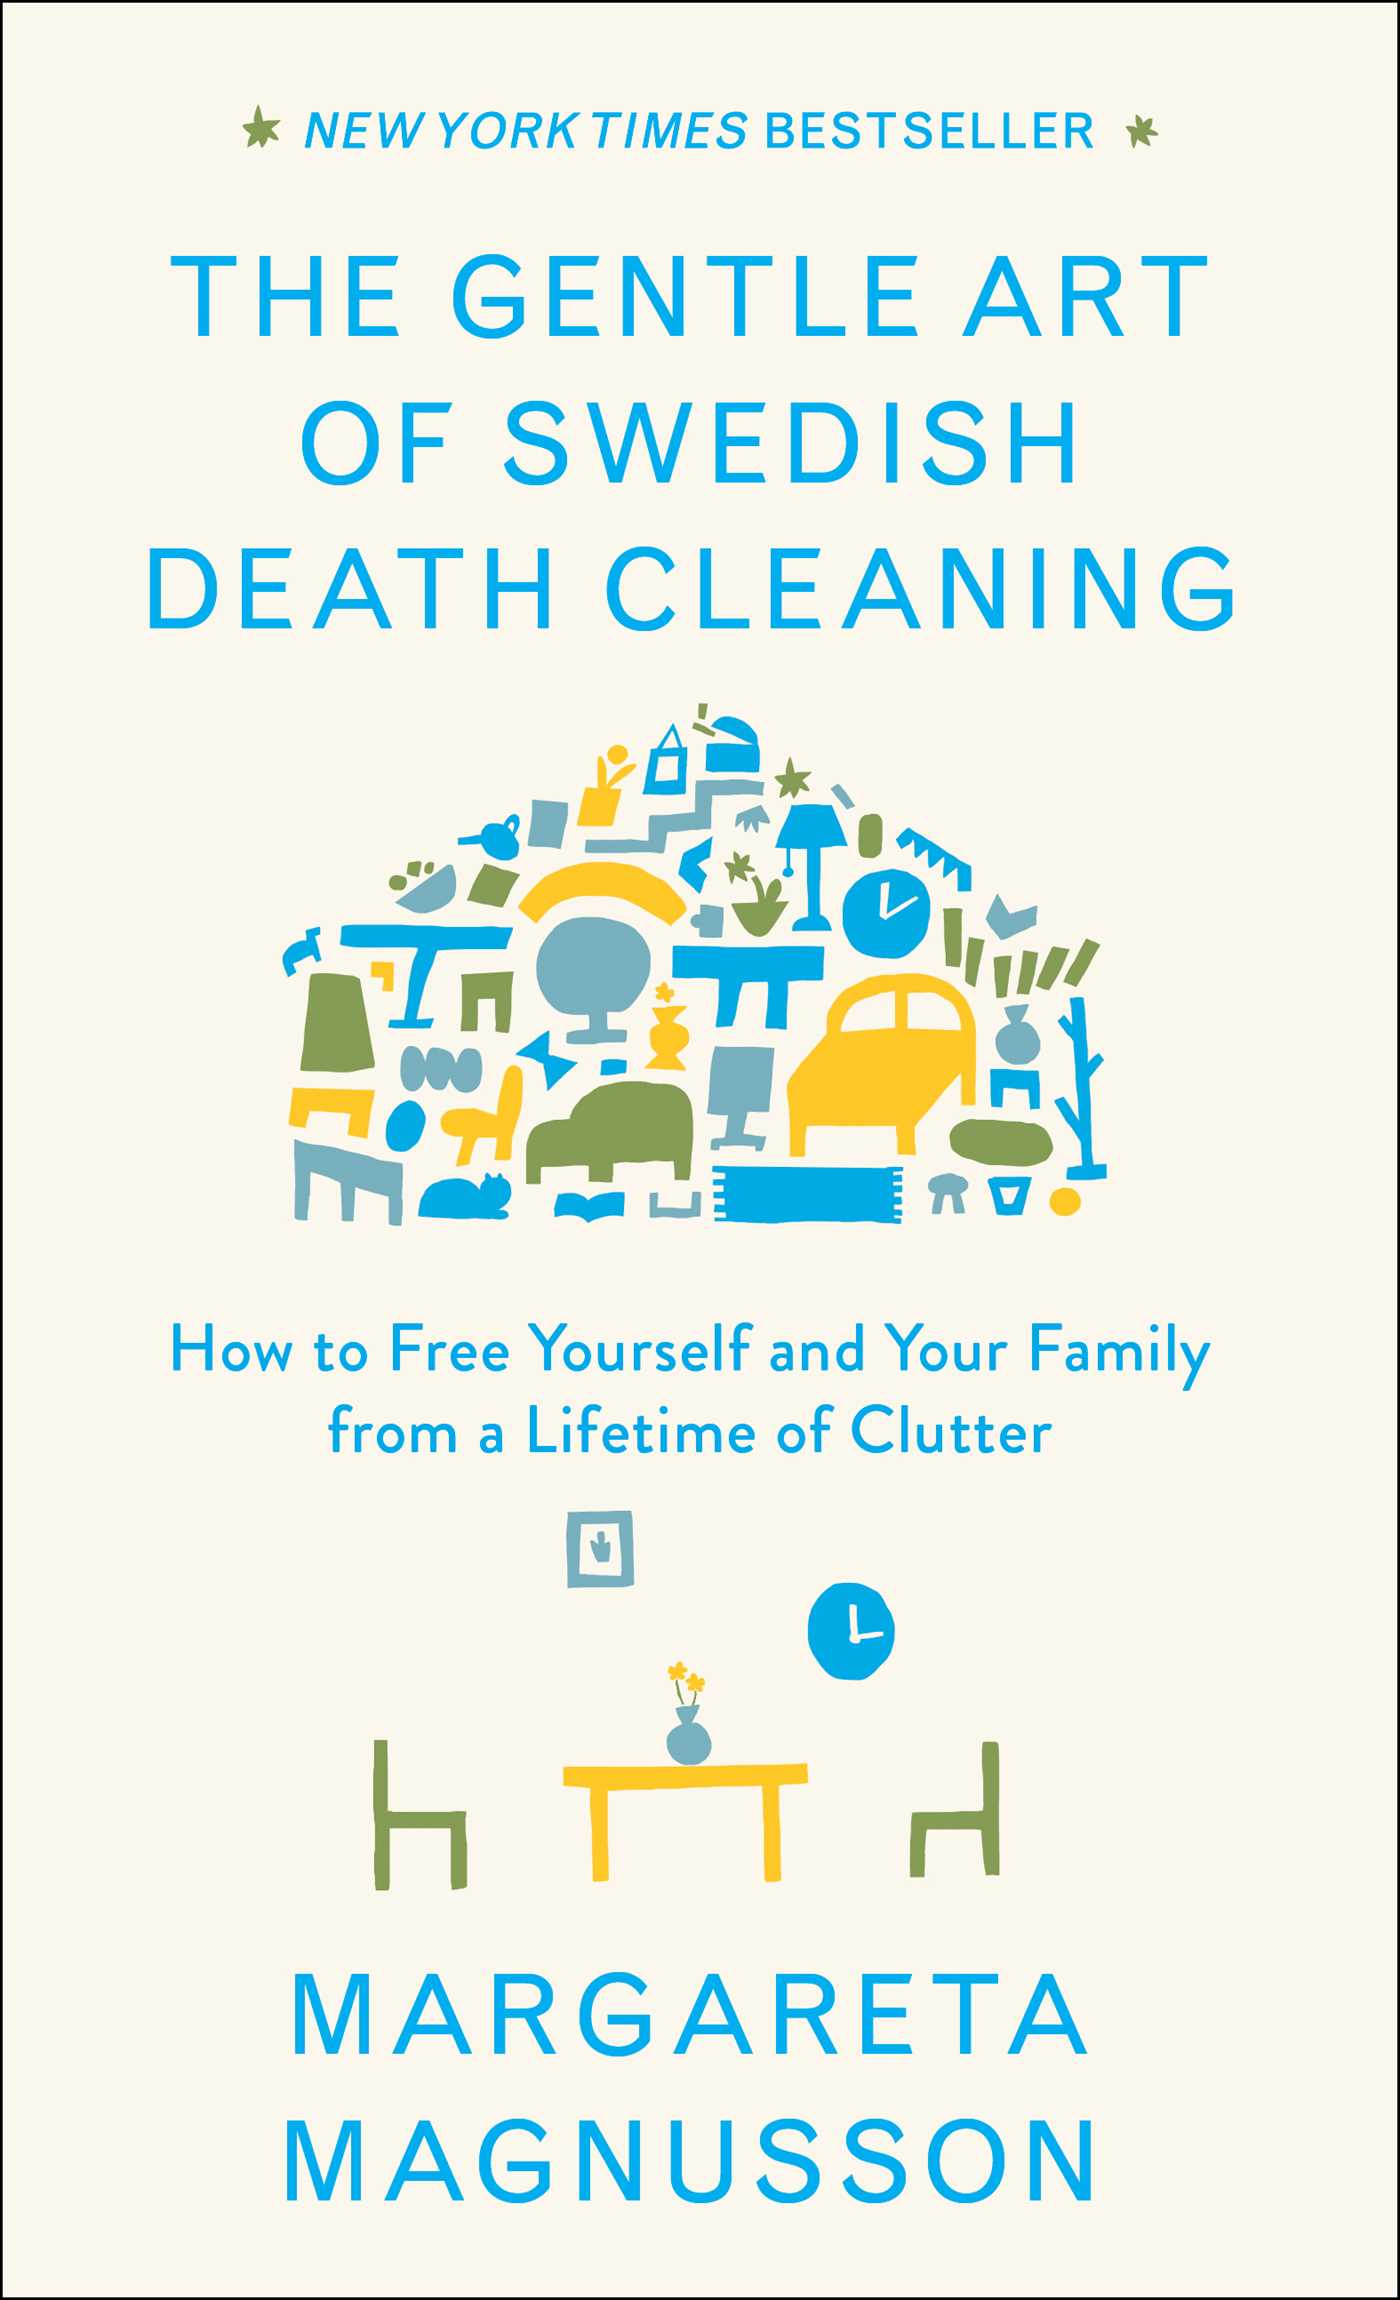 The Gentle Art of Swedish Death Cleaning PDF Summary